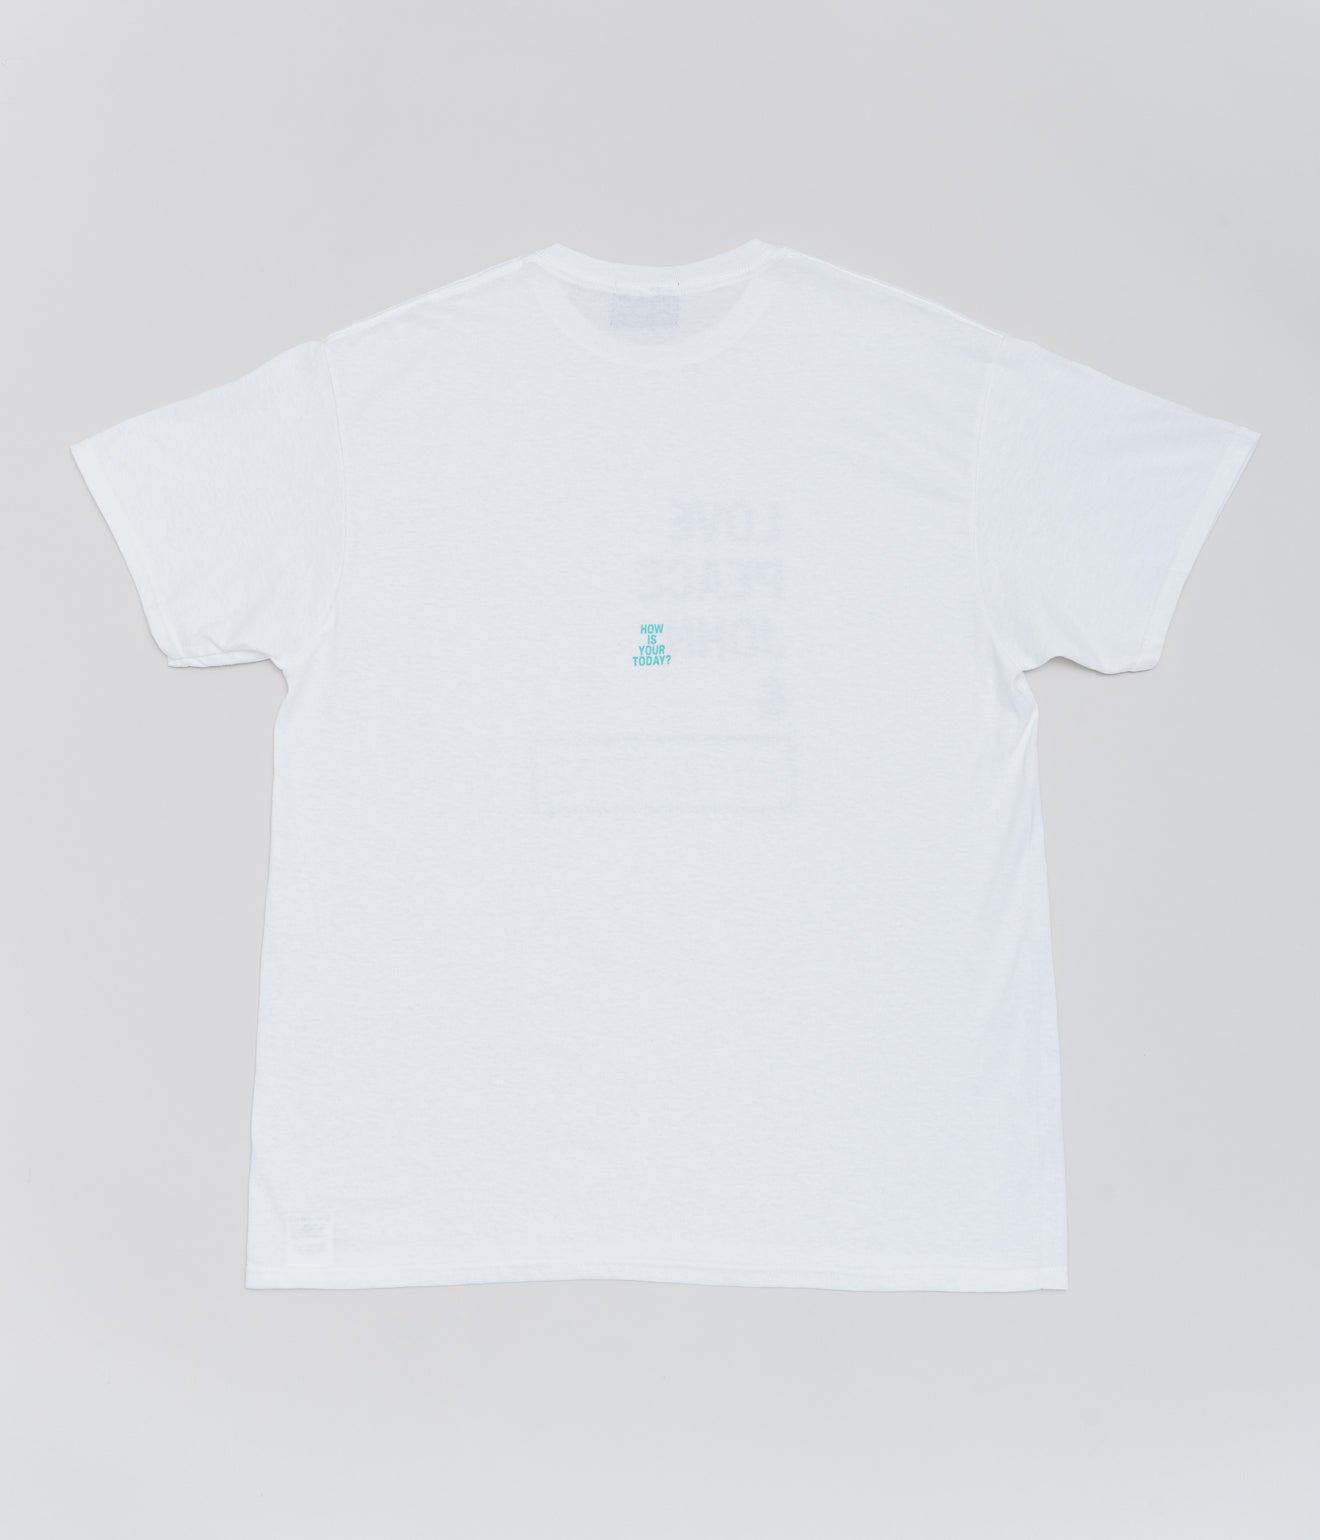 TODAY edition "Write Here SS Tee" WHITE - WEAREALLANIMALS